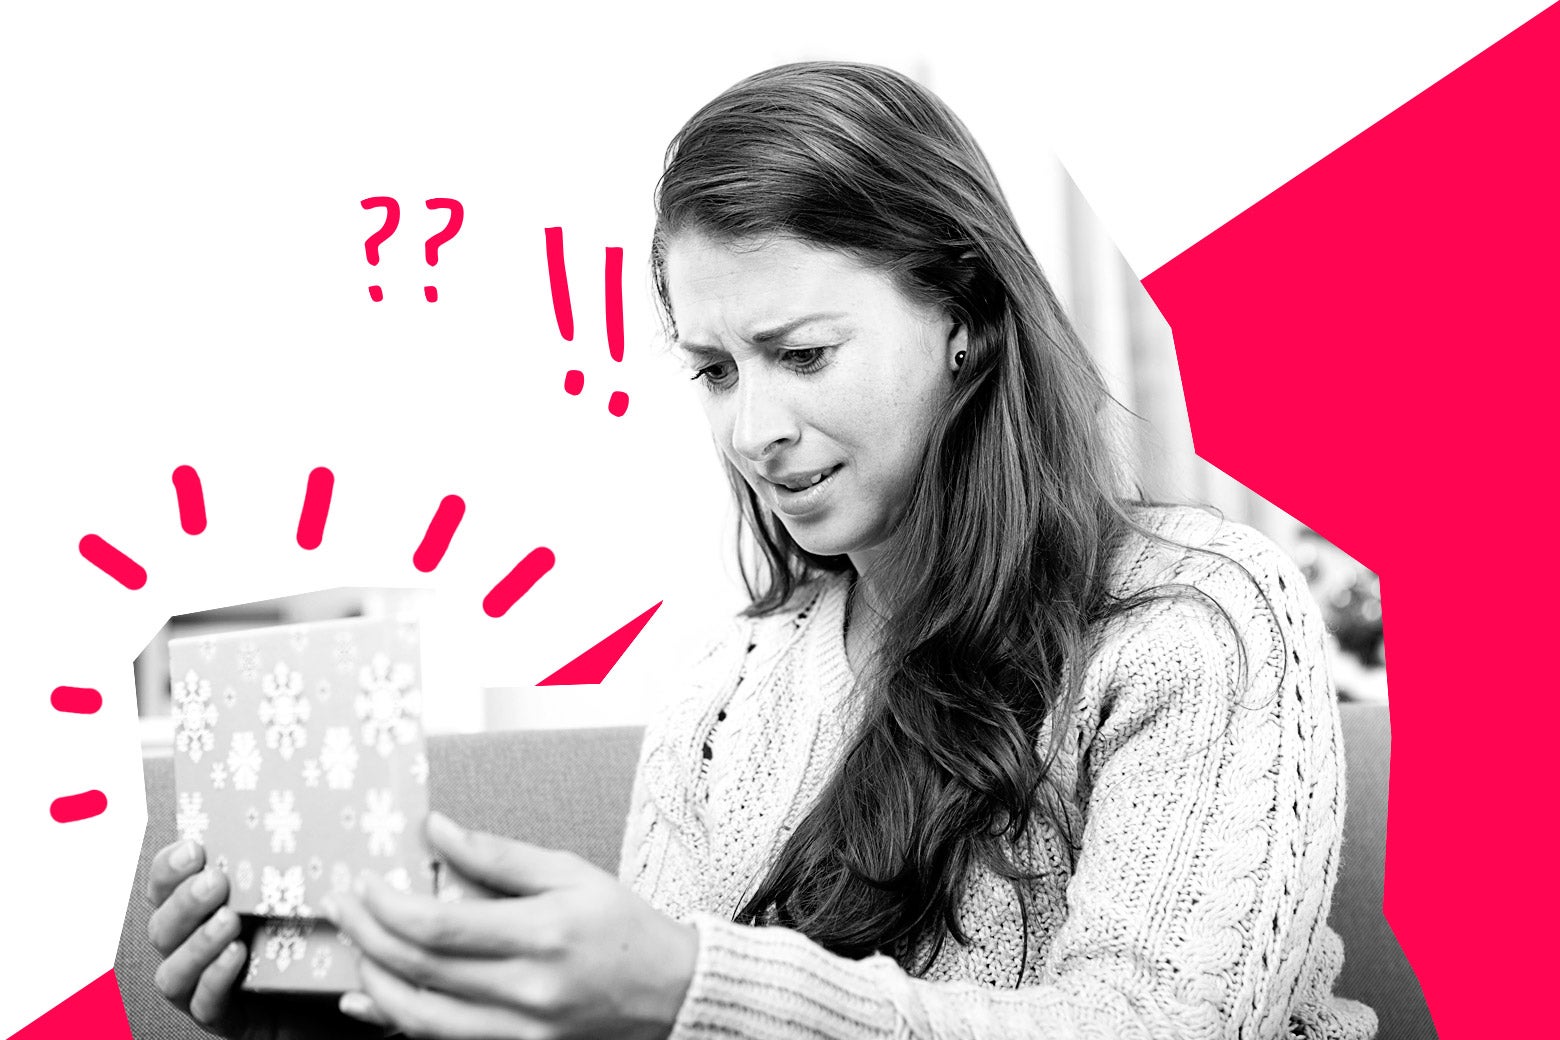 A woman looking disgustingly at a gift she just opened.